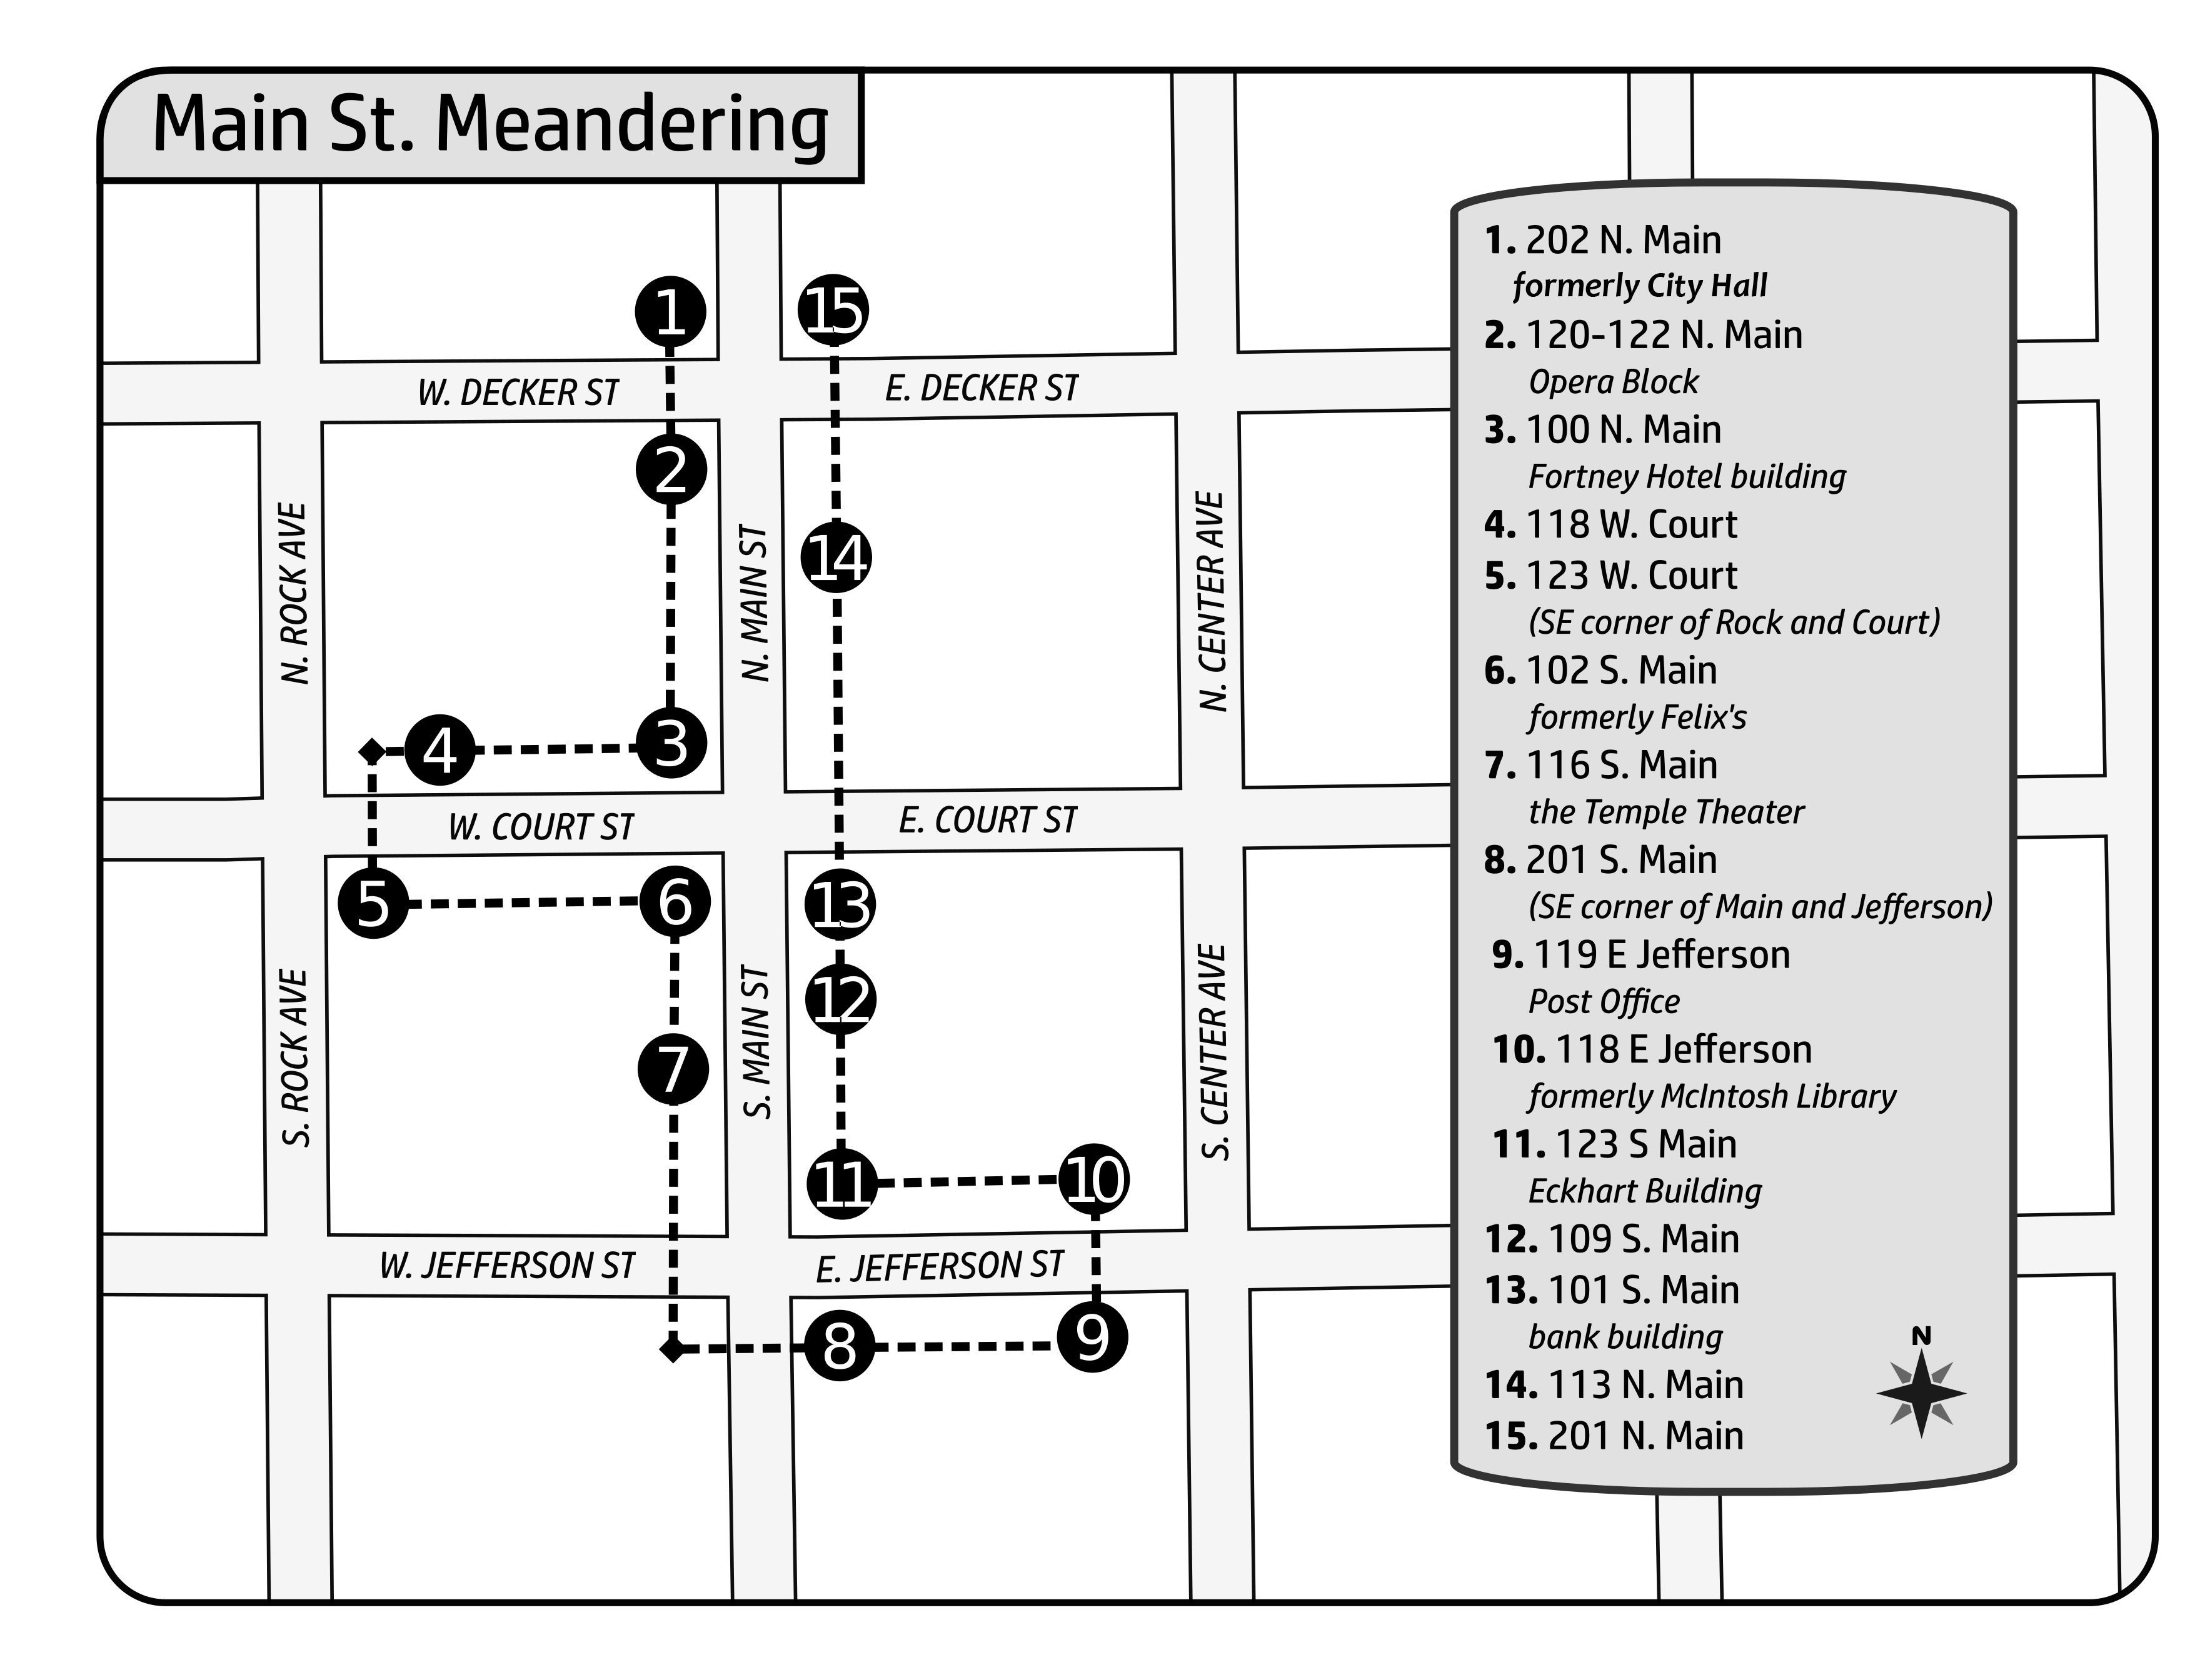 Main St. Meandering map